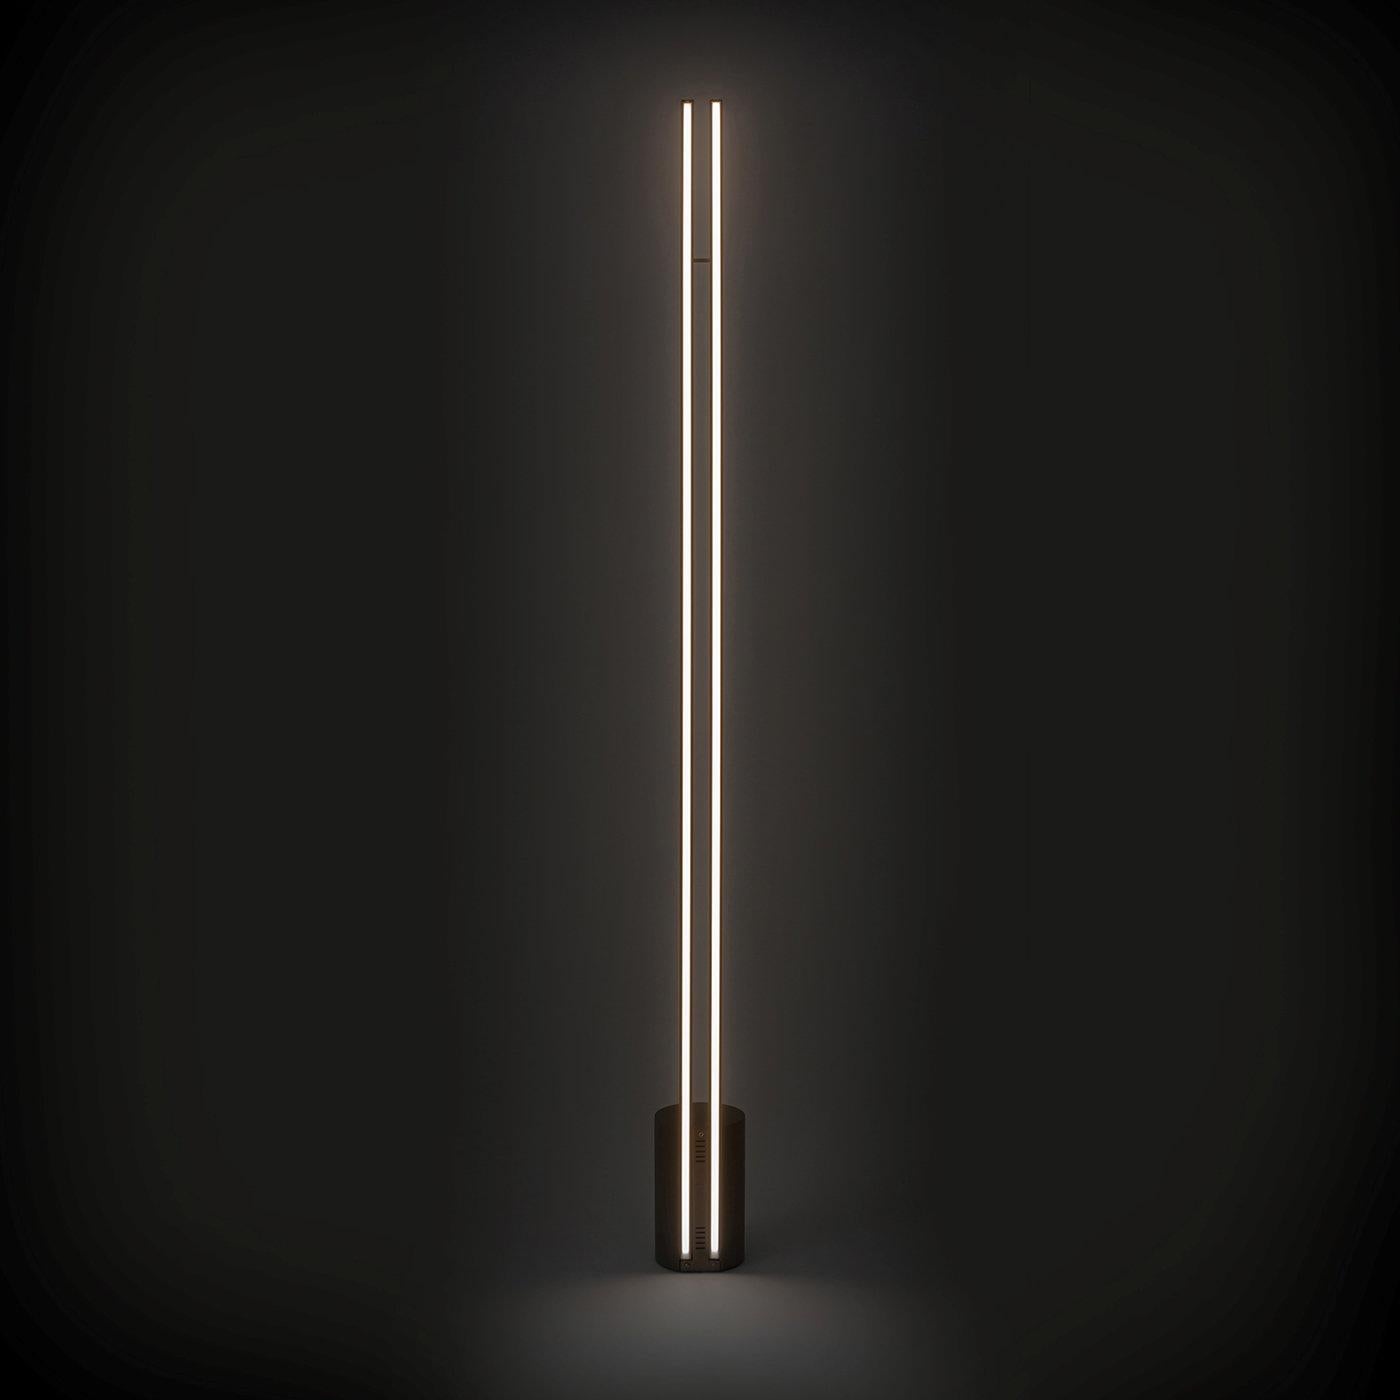 This stunning floor lamp is the epitome of contemporary elegance and minimalist flair. The metal structure with an antiqued bronze finish features a cylindrical base from which rise two dramatically streamlined, parallel segments housing the LED